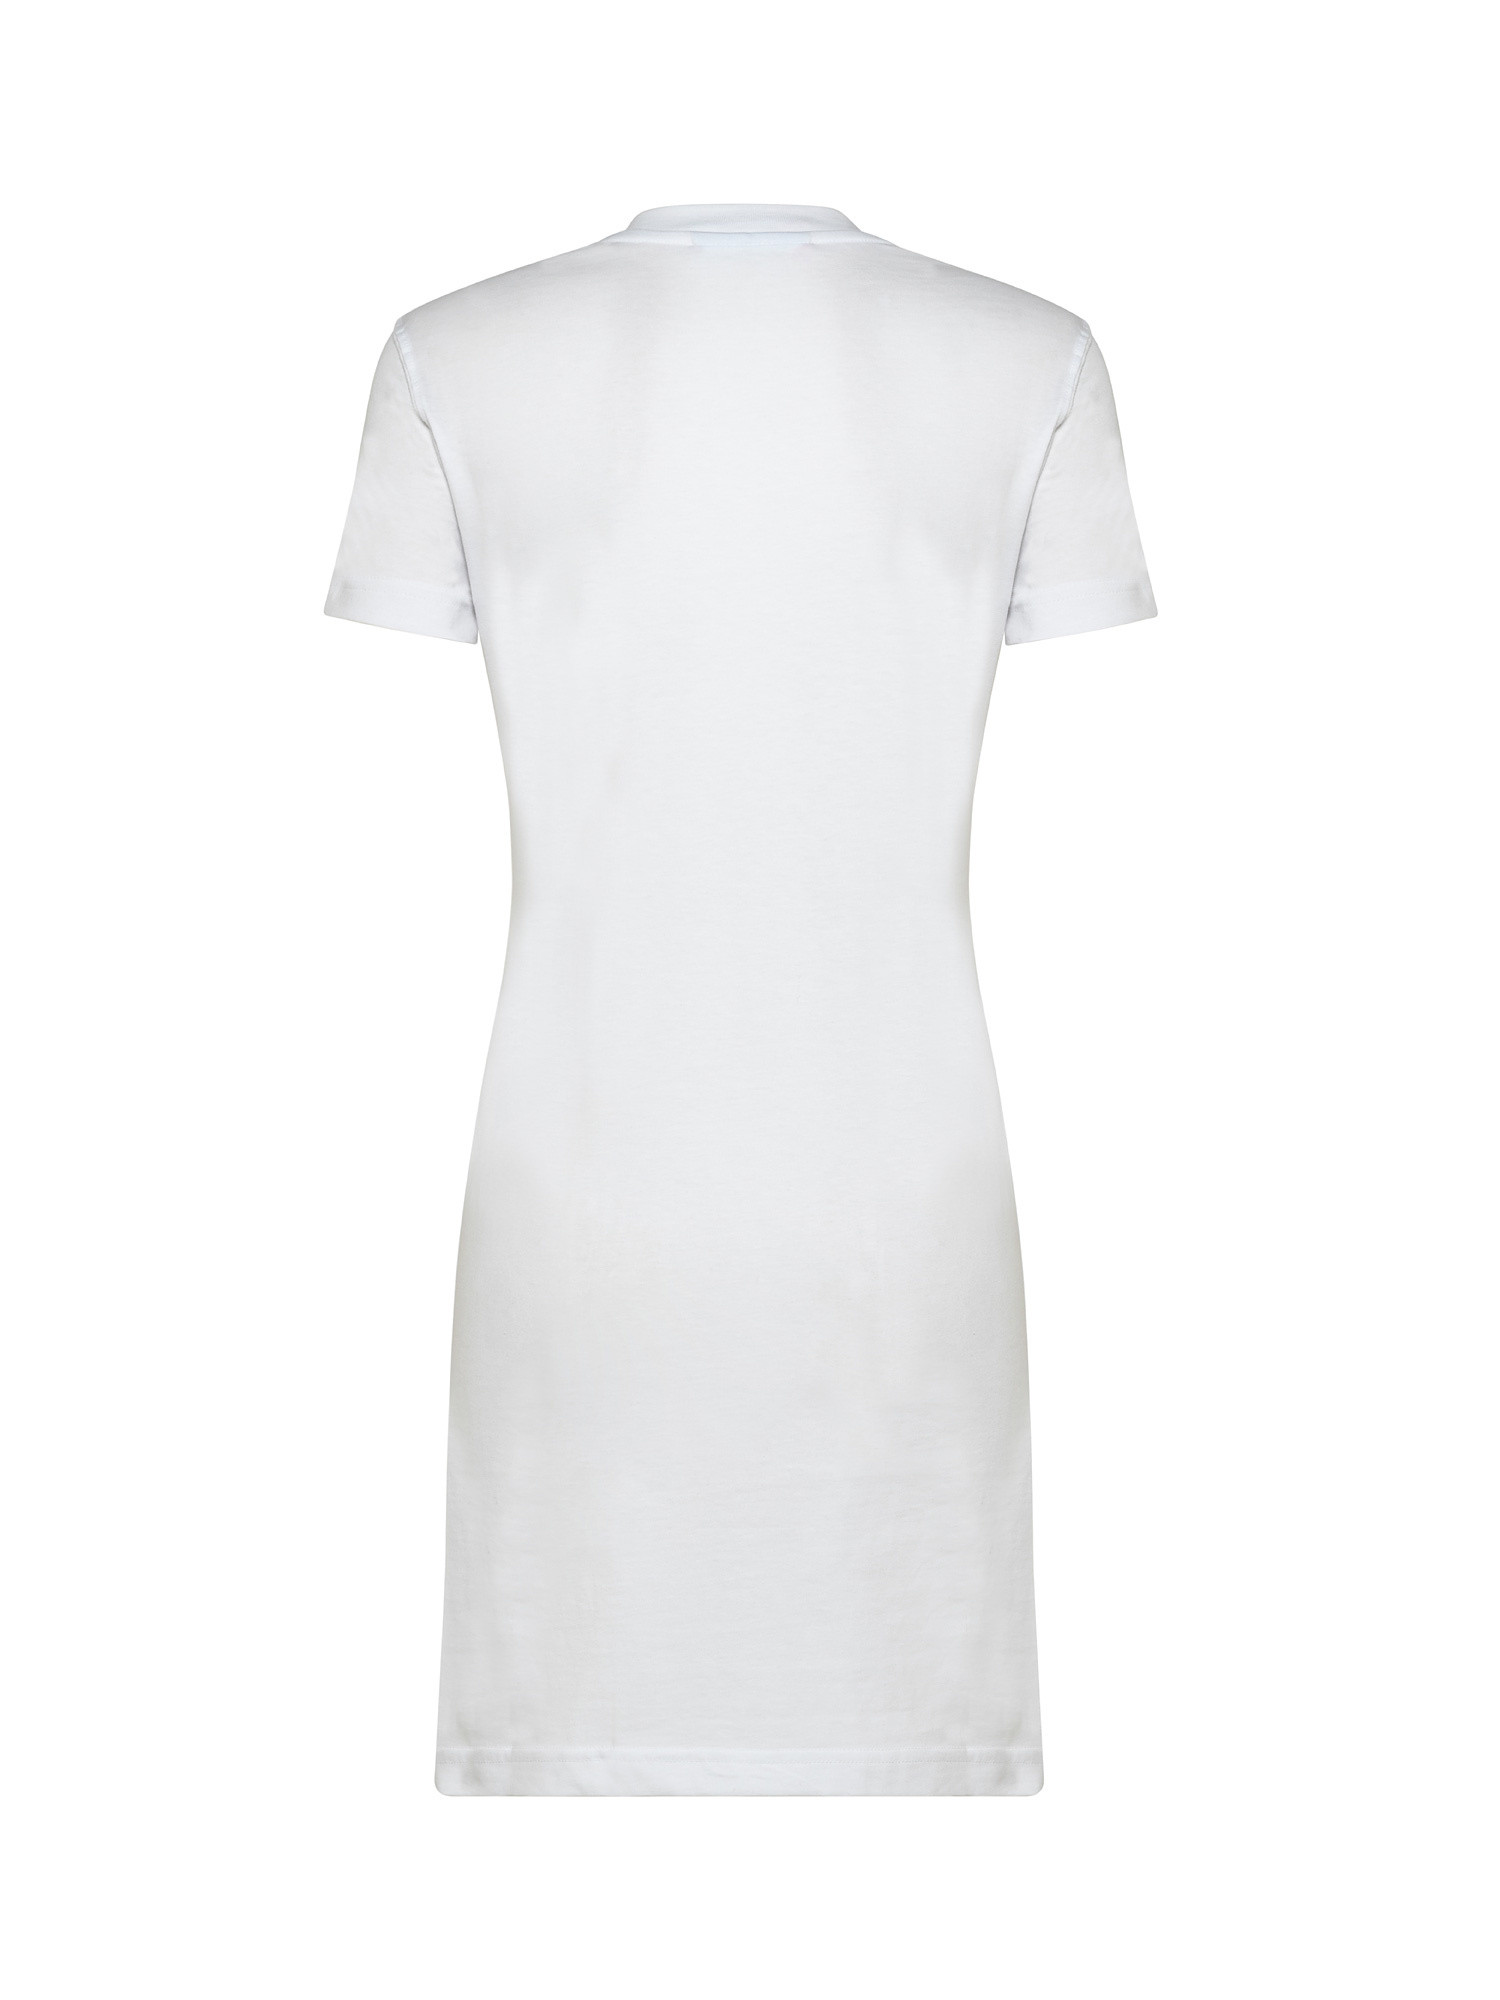 Dress with print, White, large image number 1